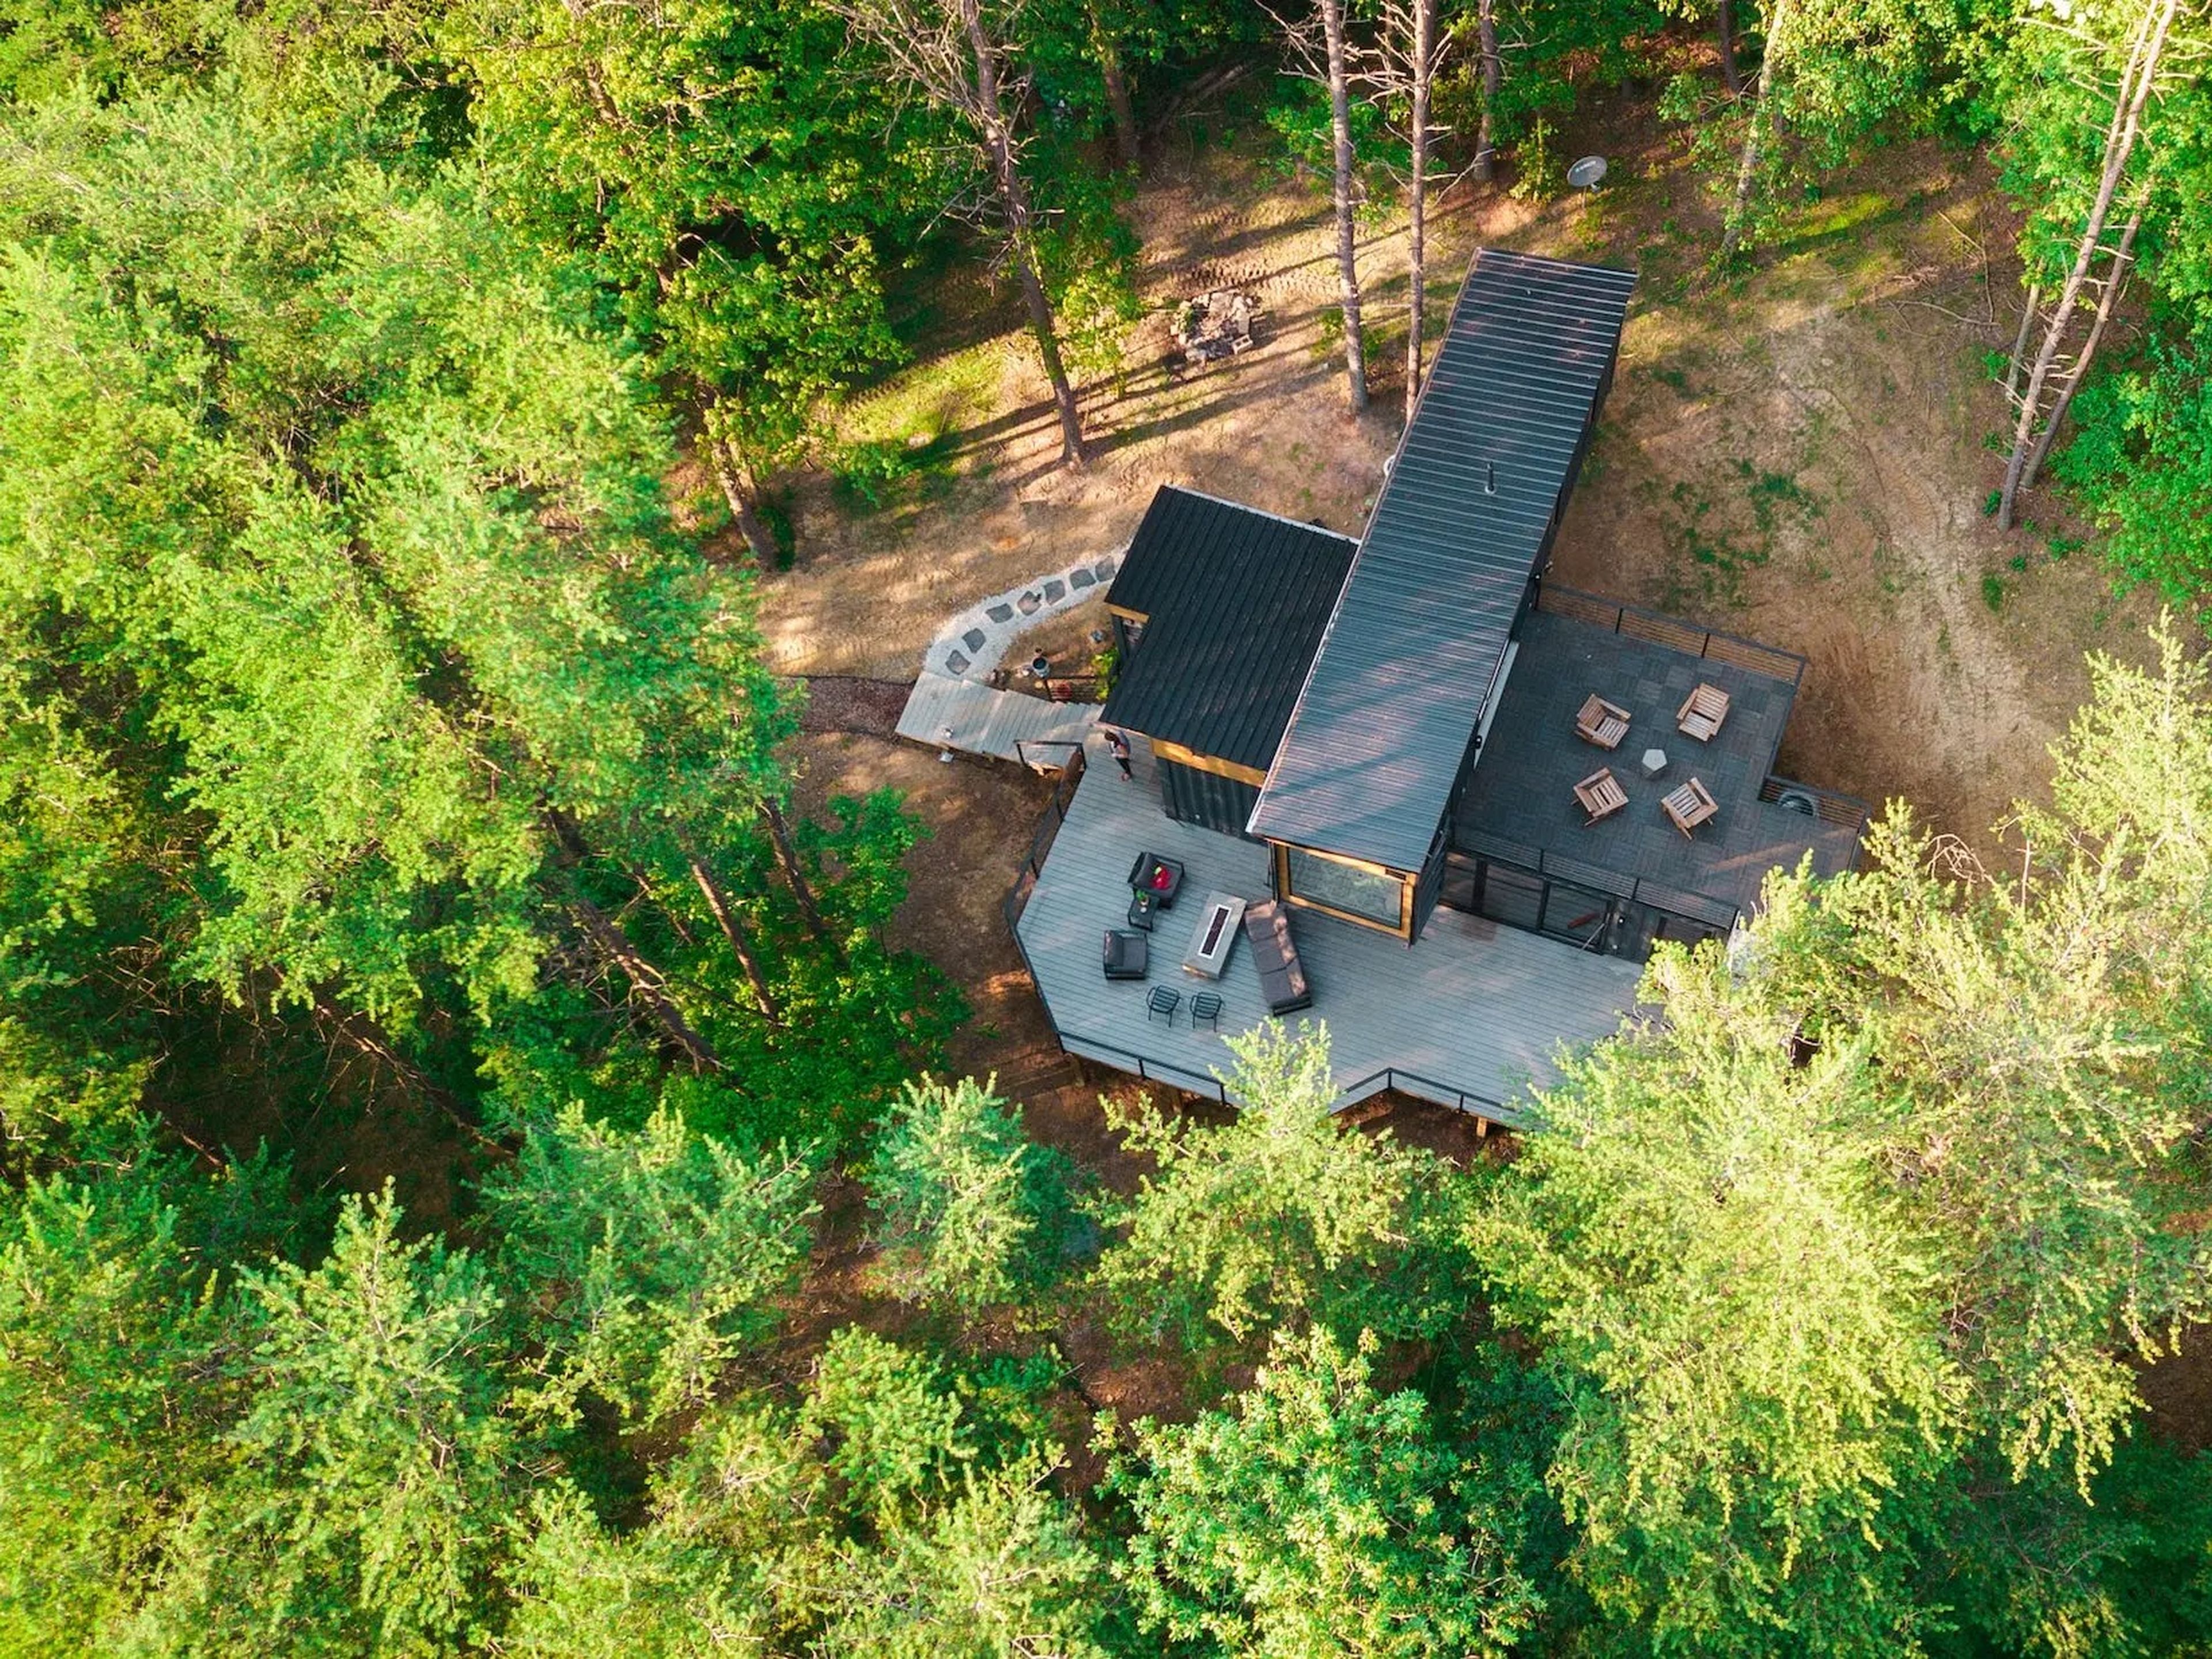 The OG shipping container home by the Box Hop surrounded by trees